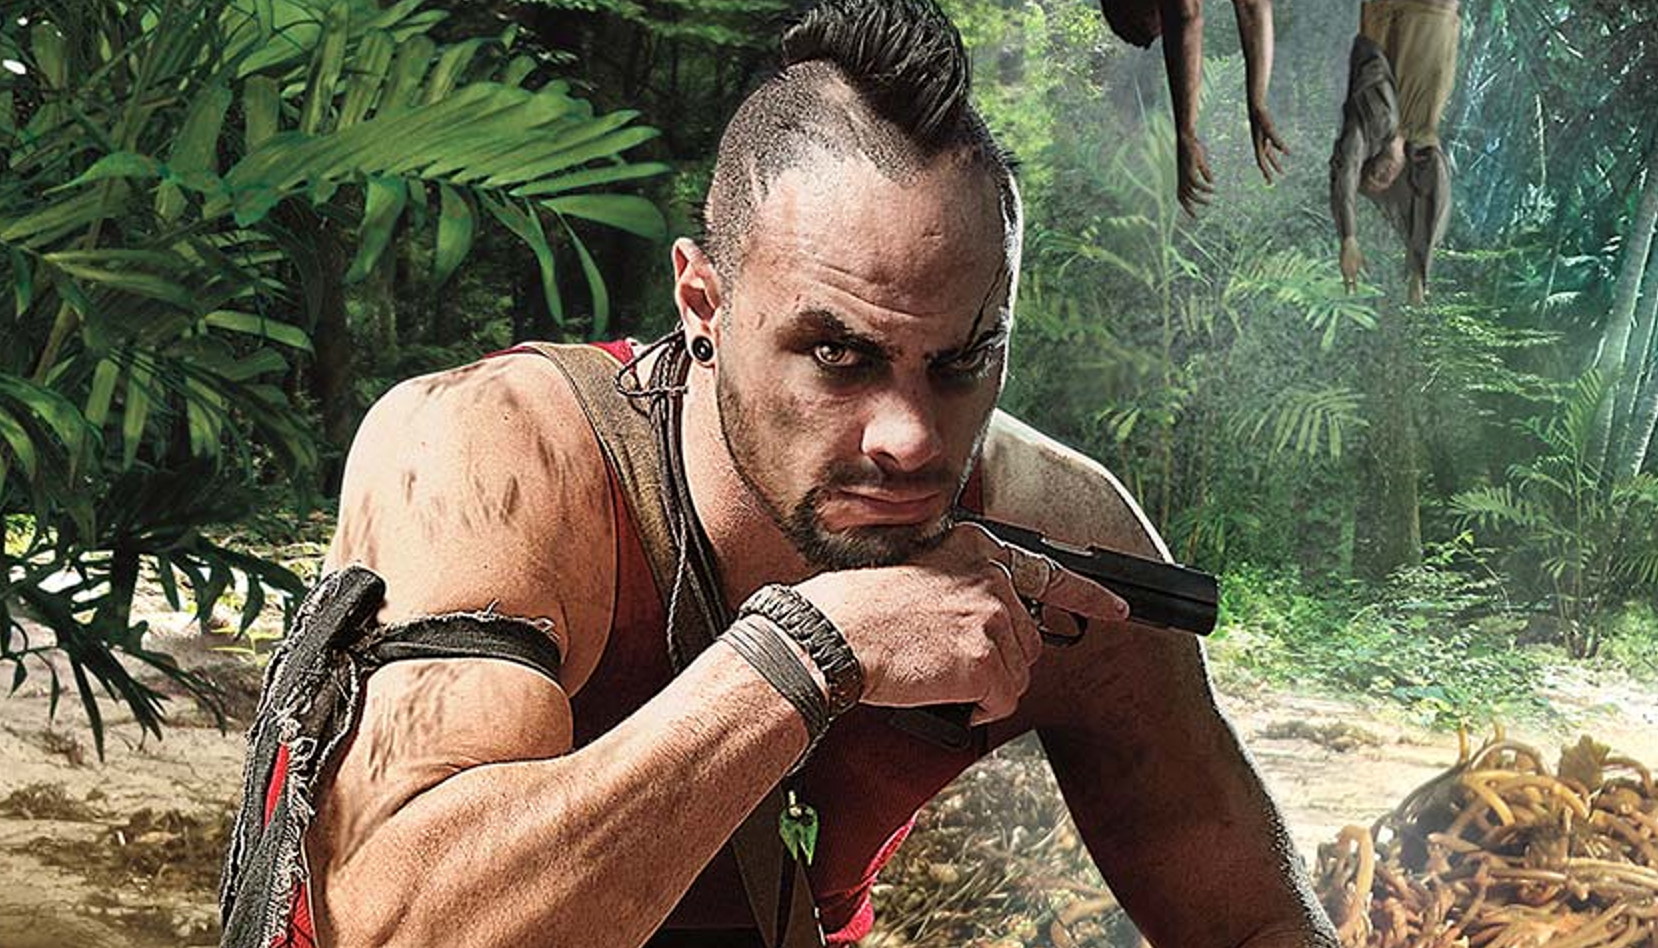 can you launch far cry 3 without uplay